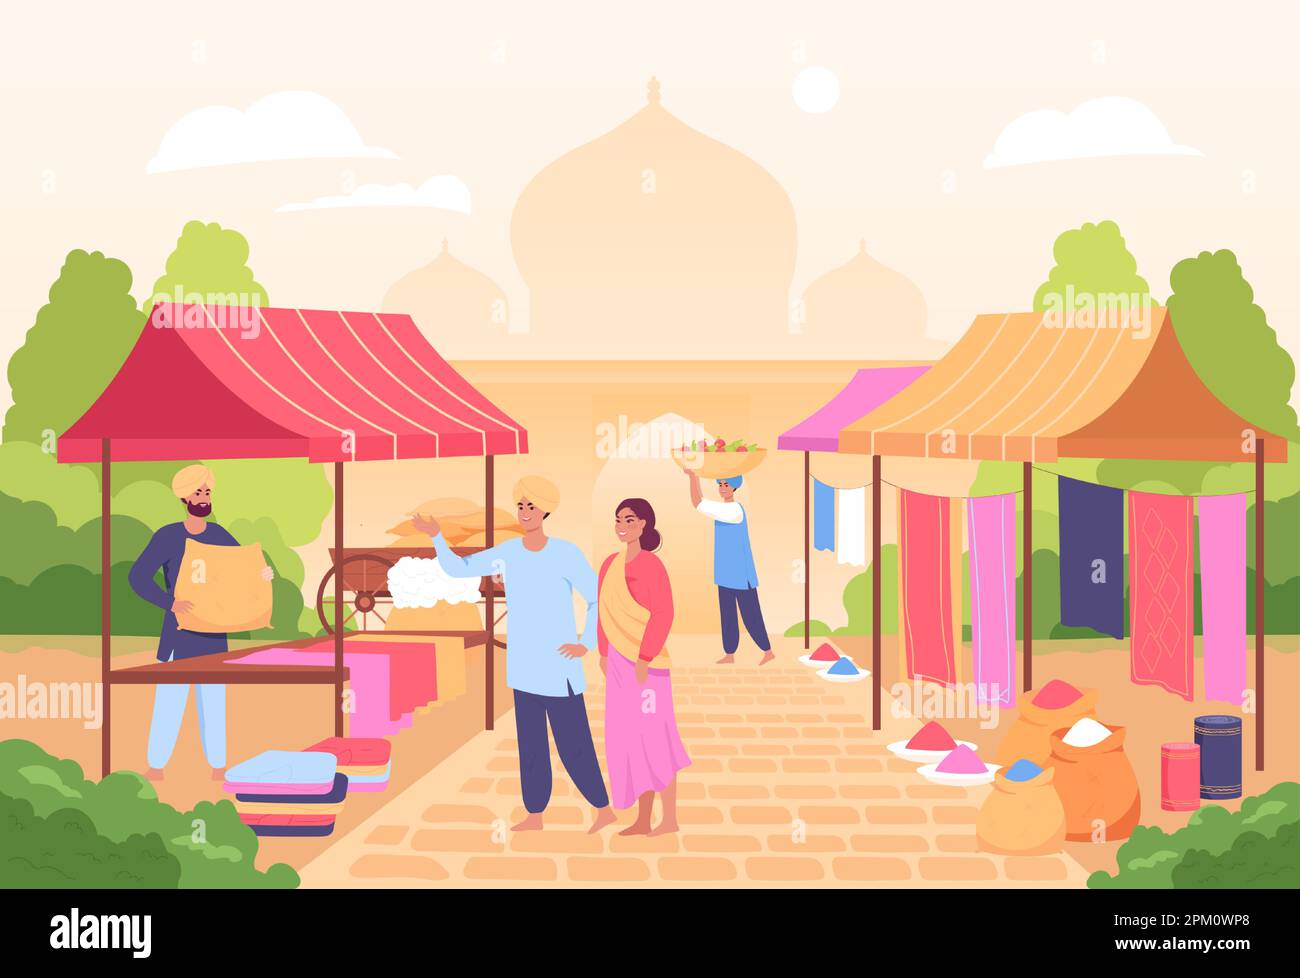 People shopping at Indian market flat vector illustration Stock Vector